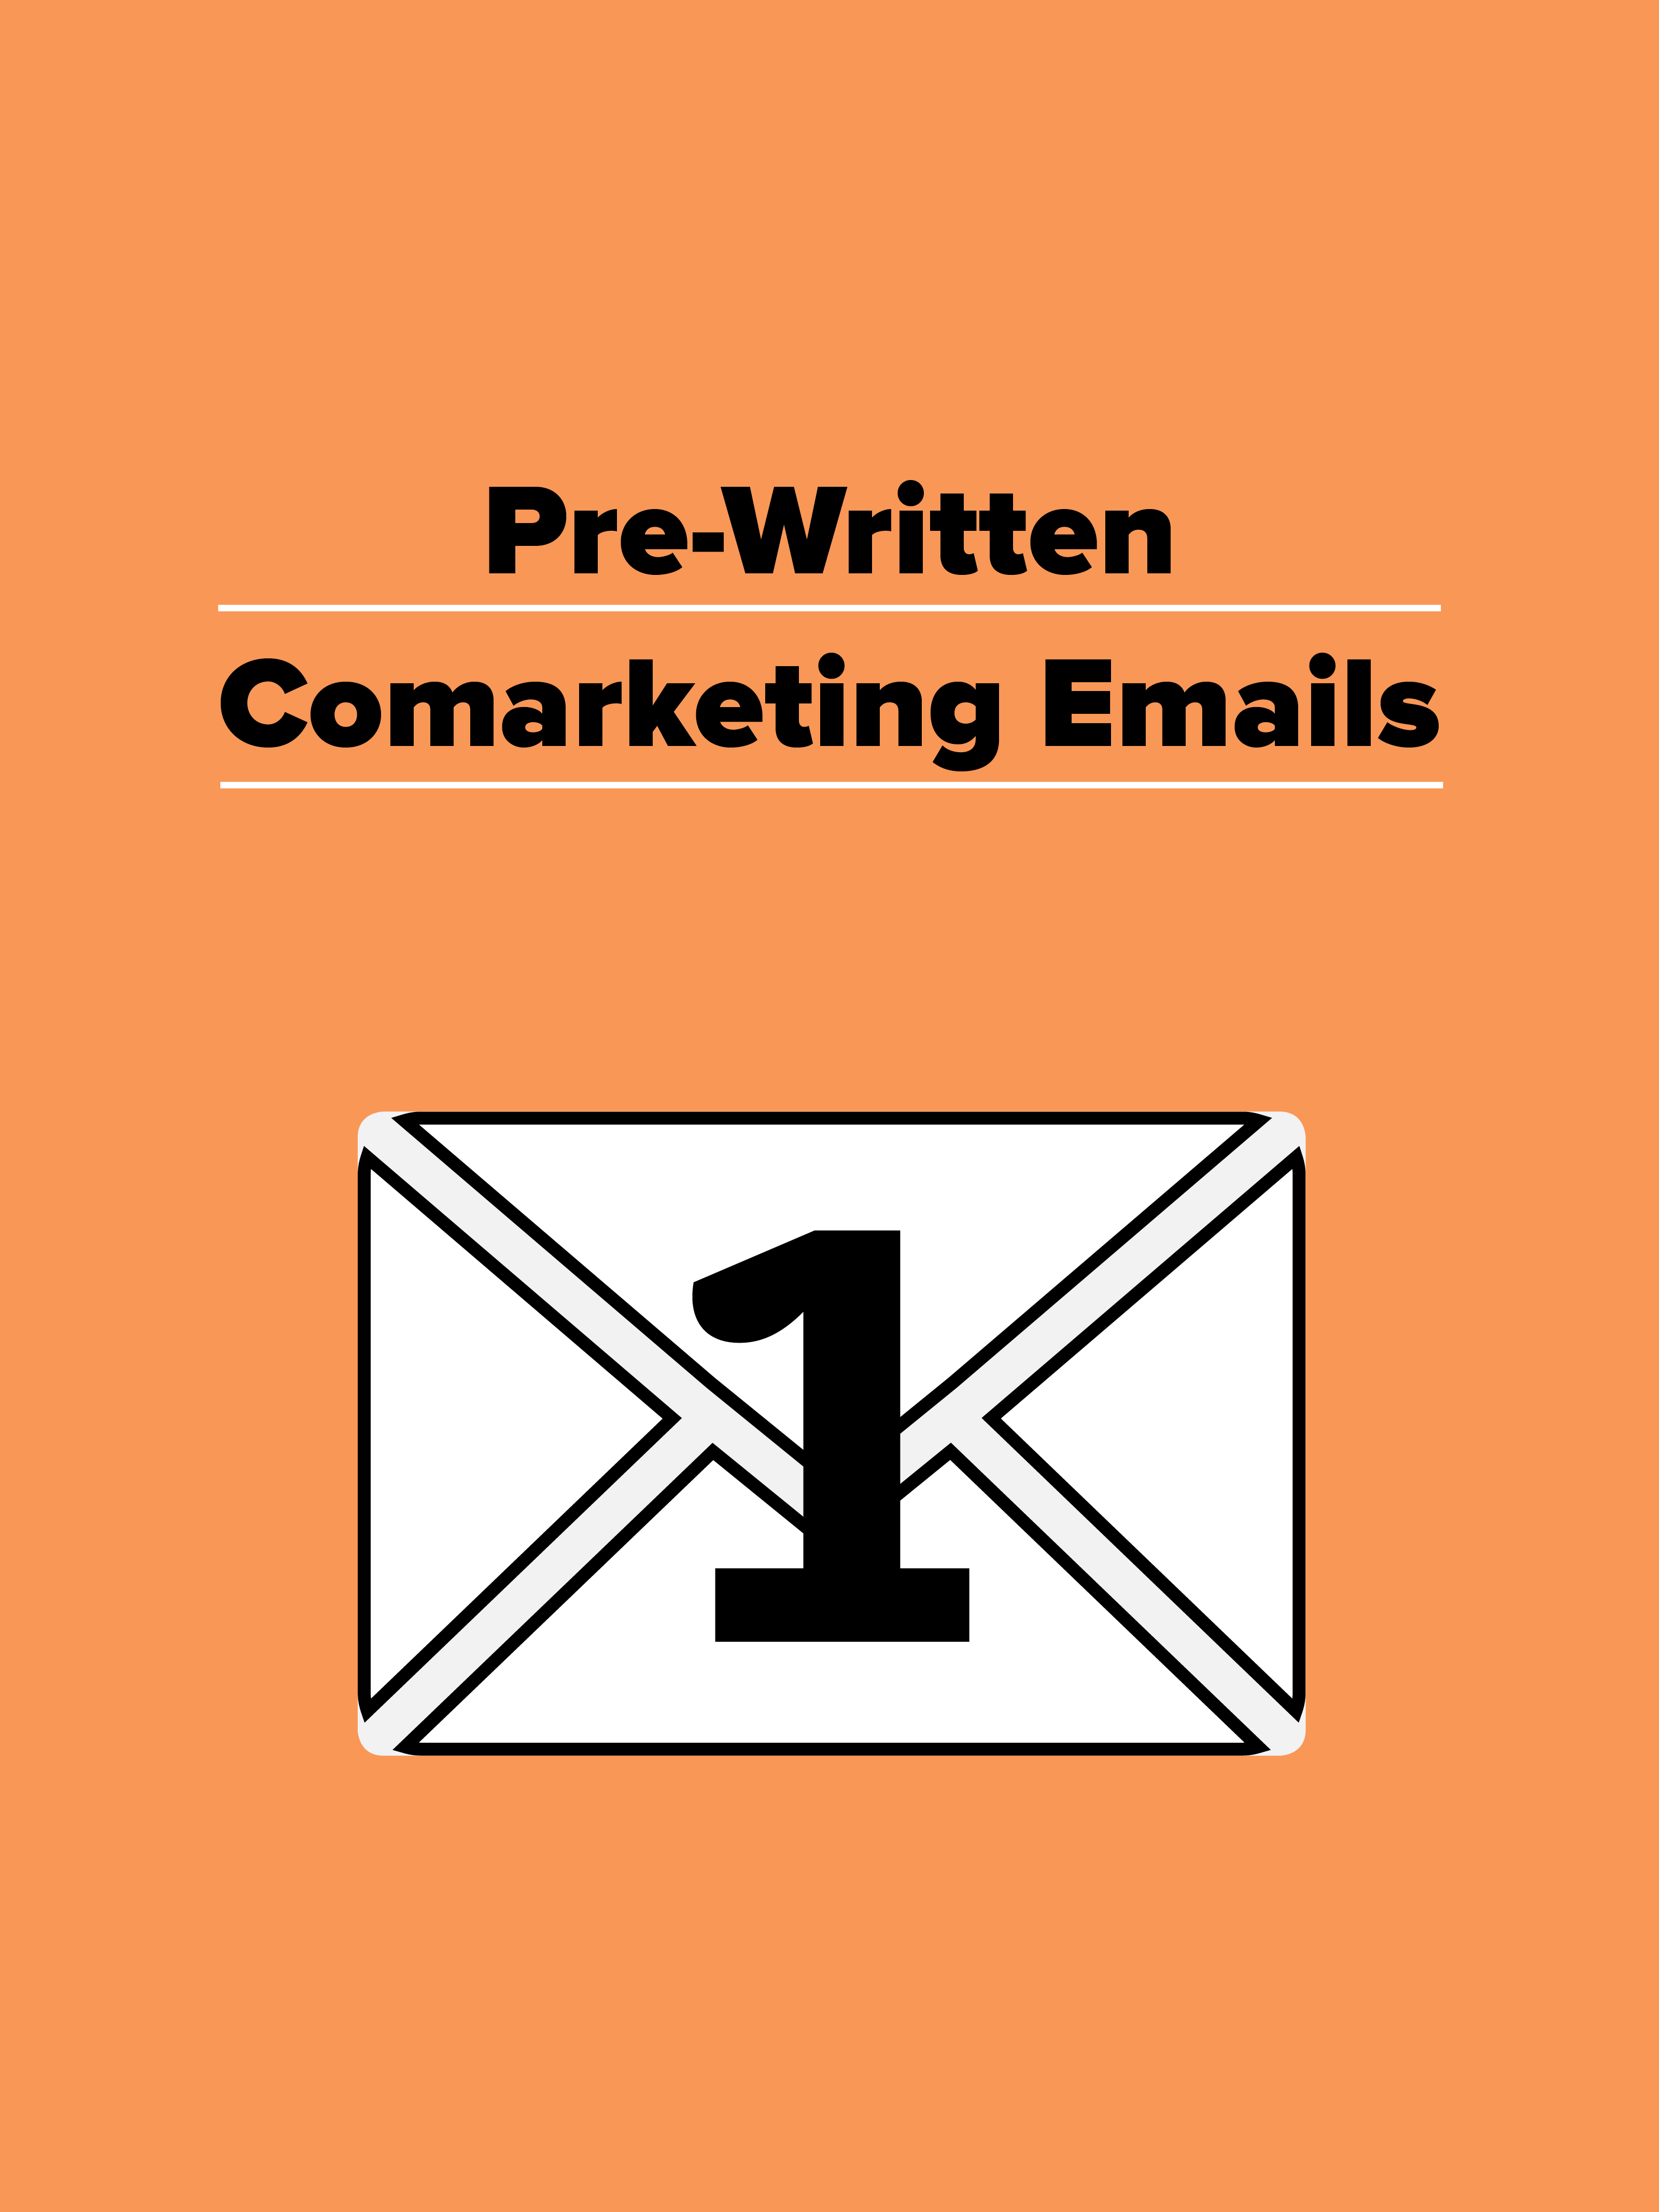 Email Templates for Marketing Sales